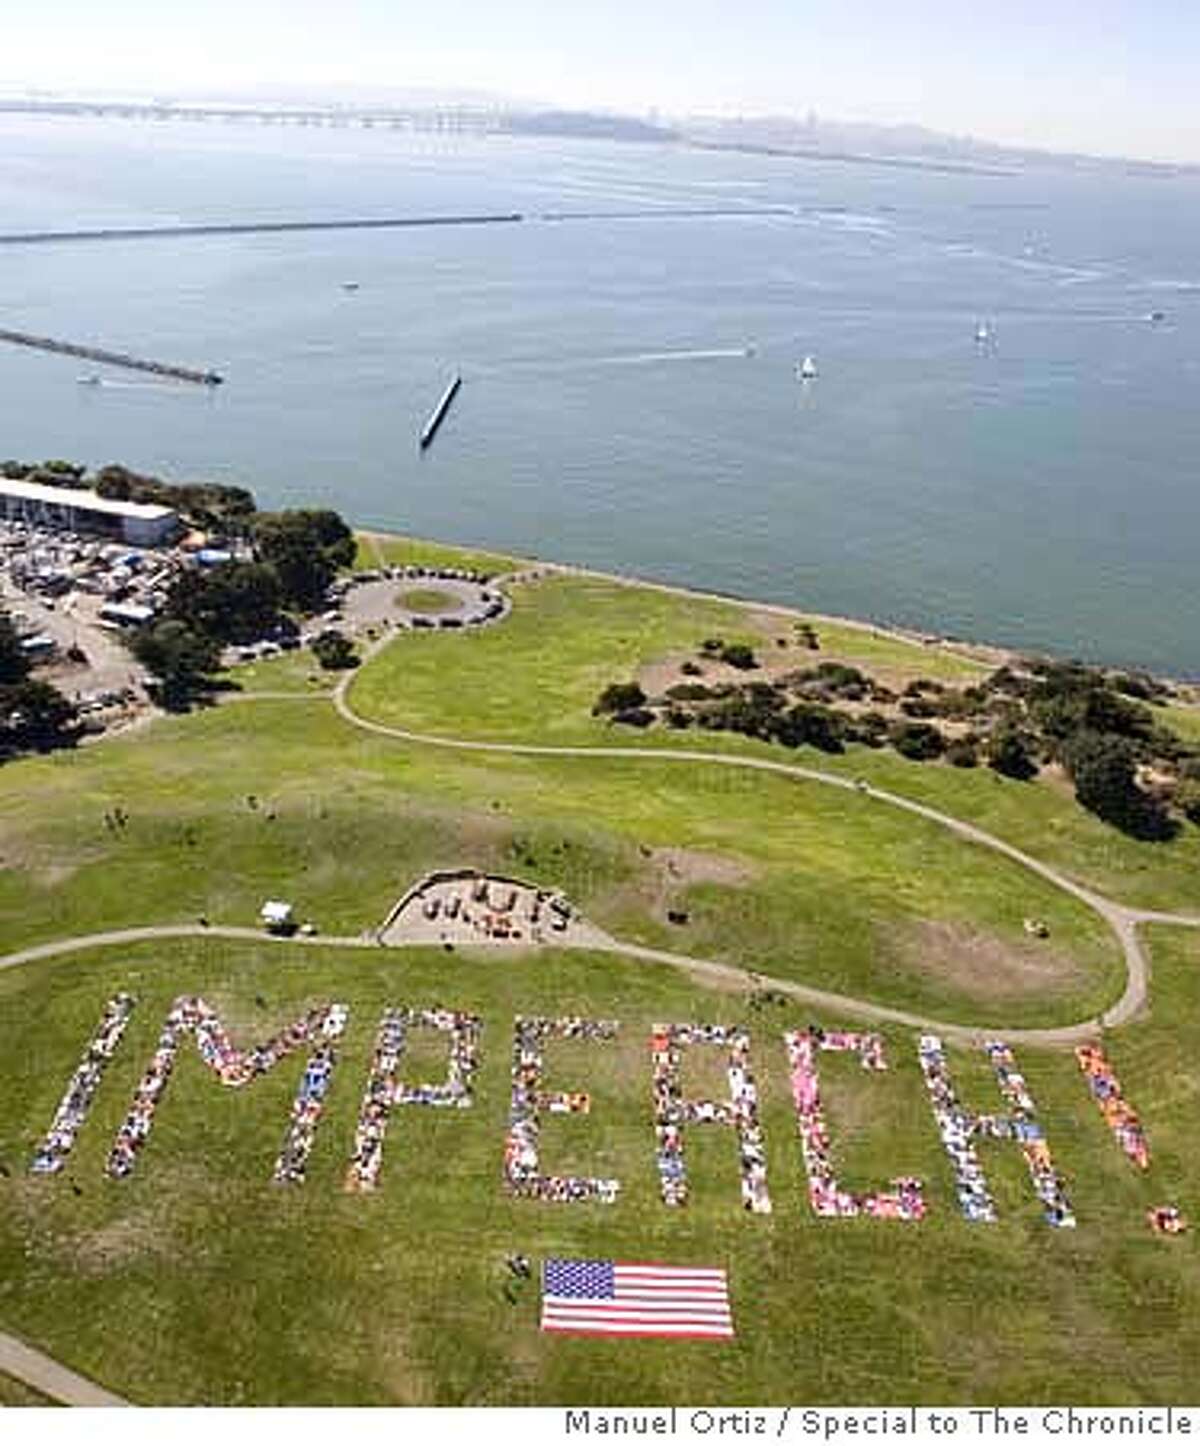 Beach Impeach � Thousands Spell out "IMPEACH!" at Cesar Chavez Park in Berkeley, October 7, 2007. CR: Manuel Ortiz/Special to The Chronicle